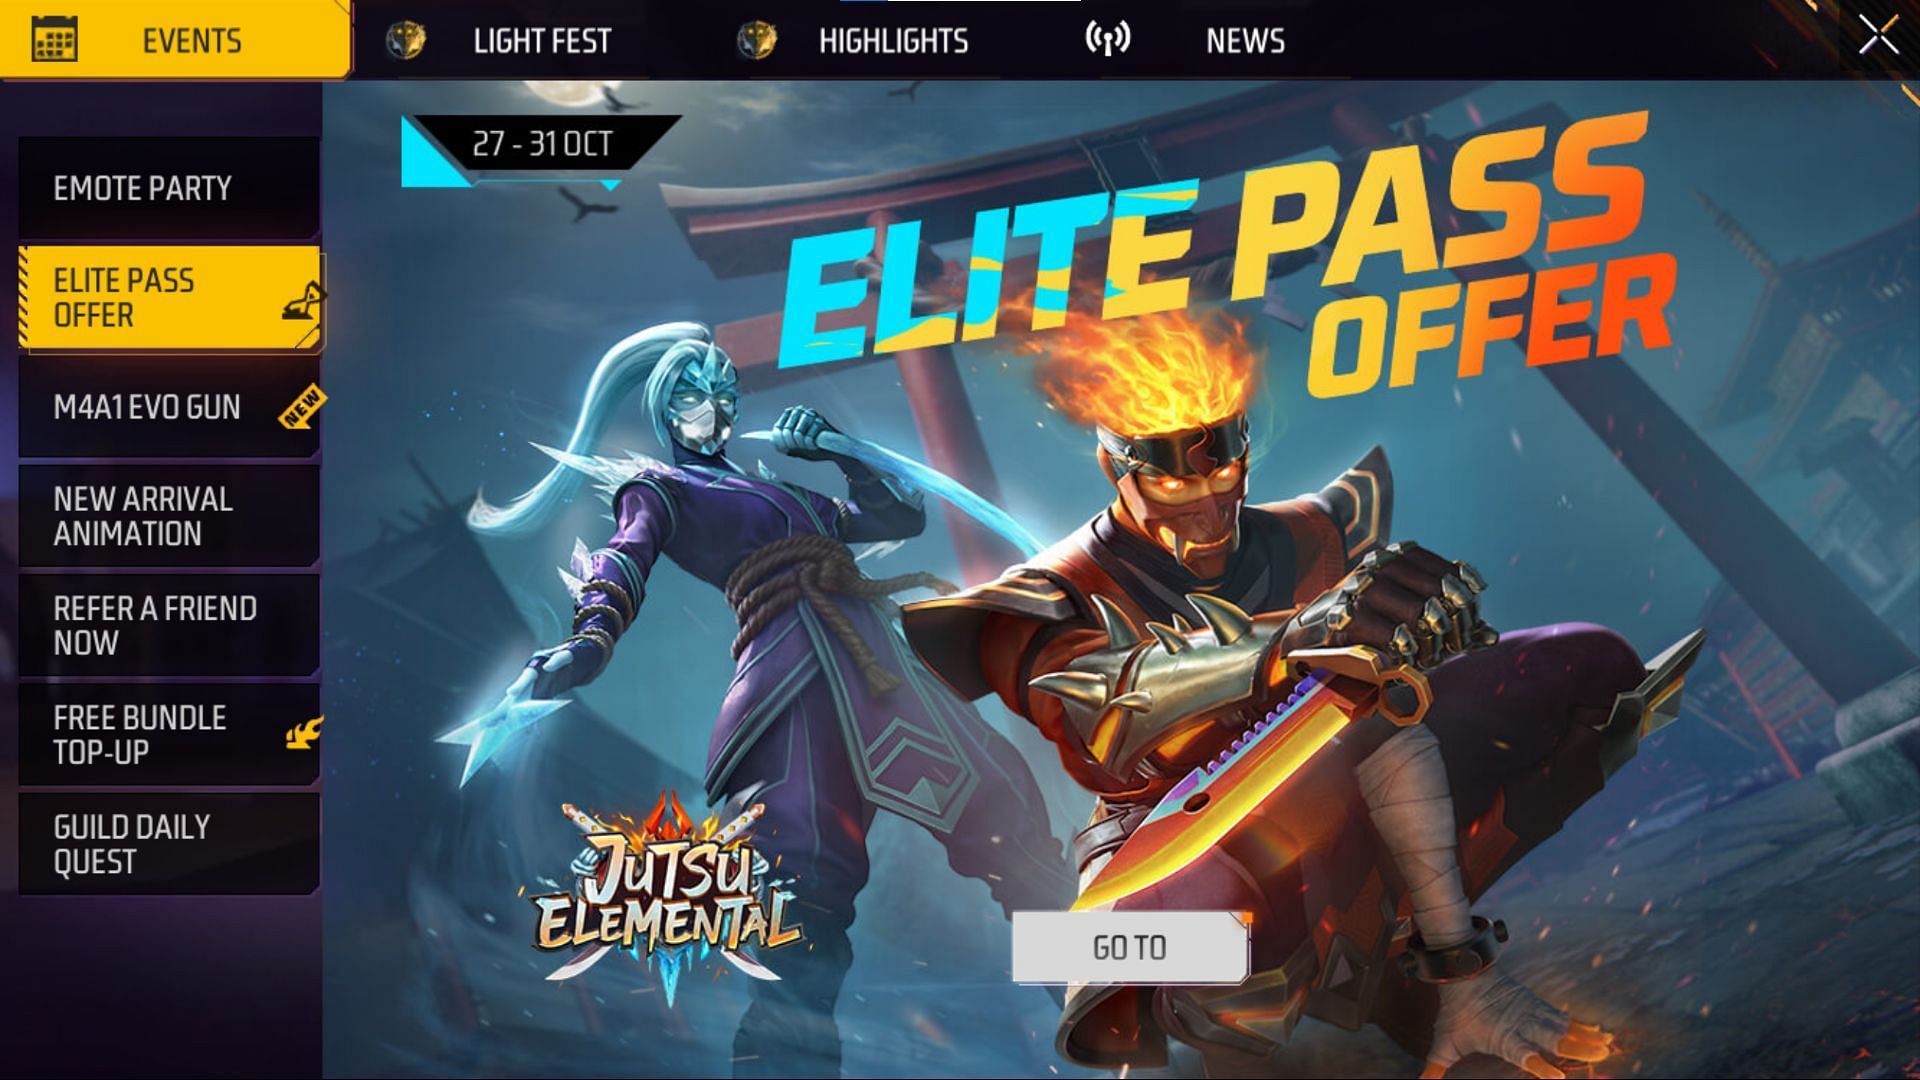 Head to the Elite Pass Offer event in the game (Image via Garena)